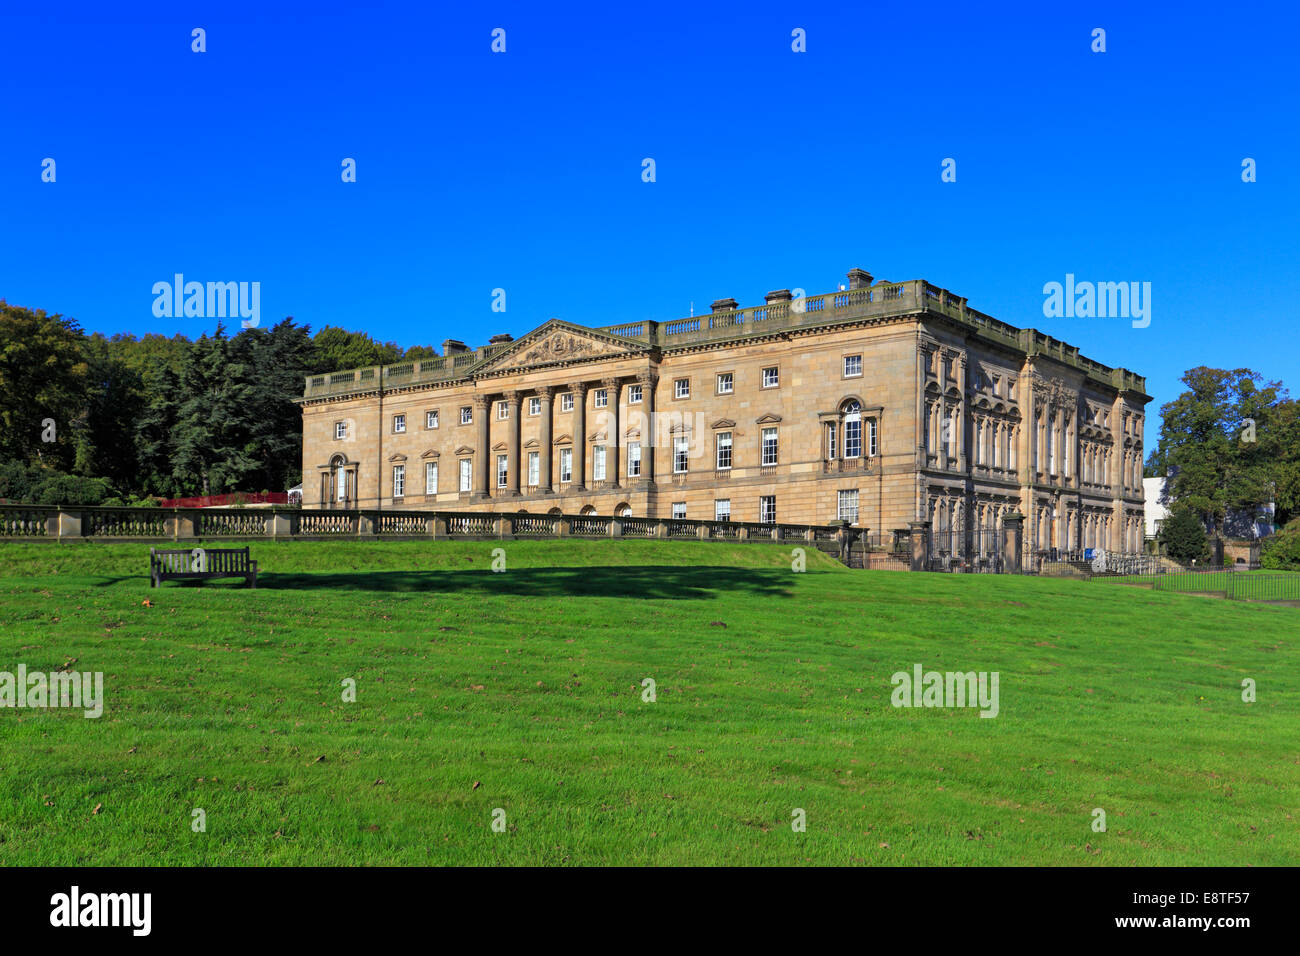 Château de Wentworth, Stainborough, Barnsley, South Yorkshire, Angleterre, Royaume-Uni. Banque D'Images